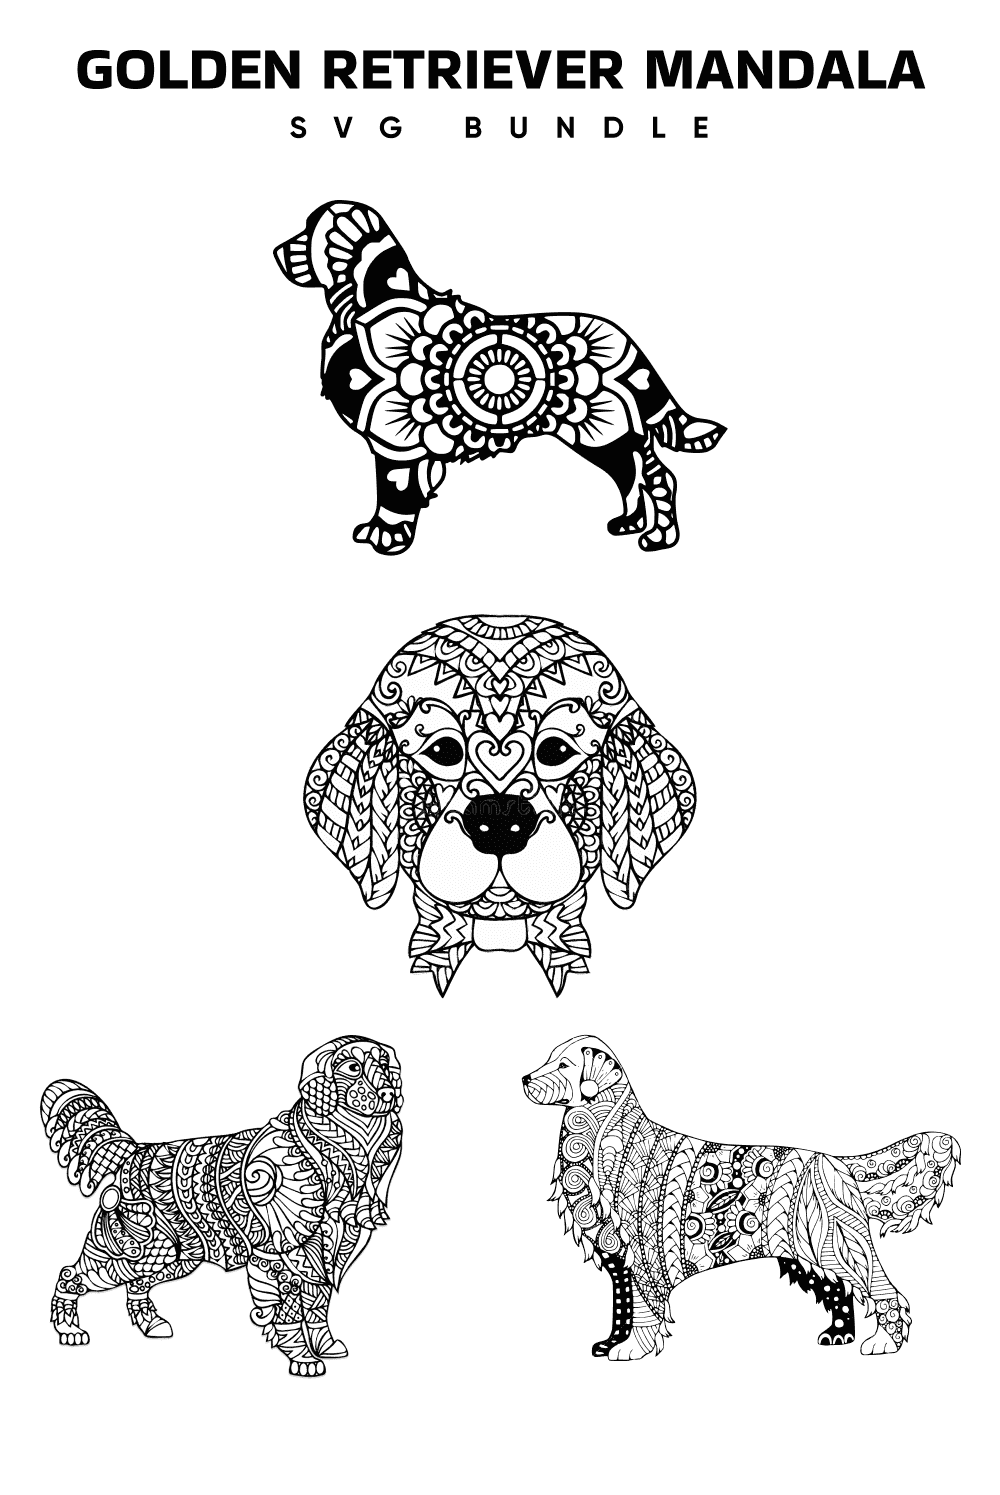 The golden retriever and the dachshund coloring pages.